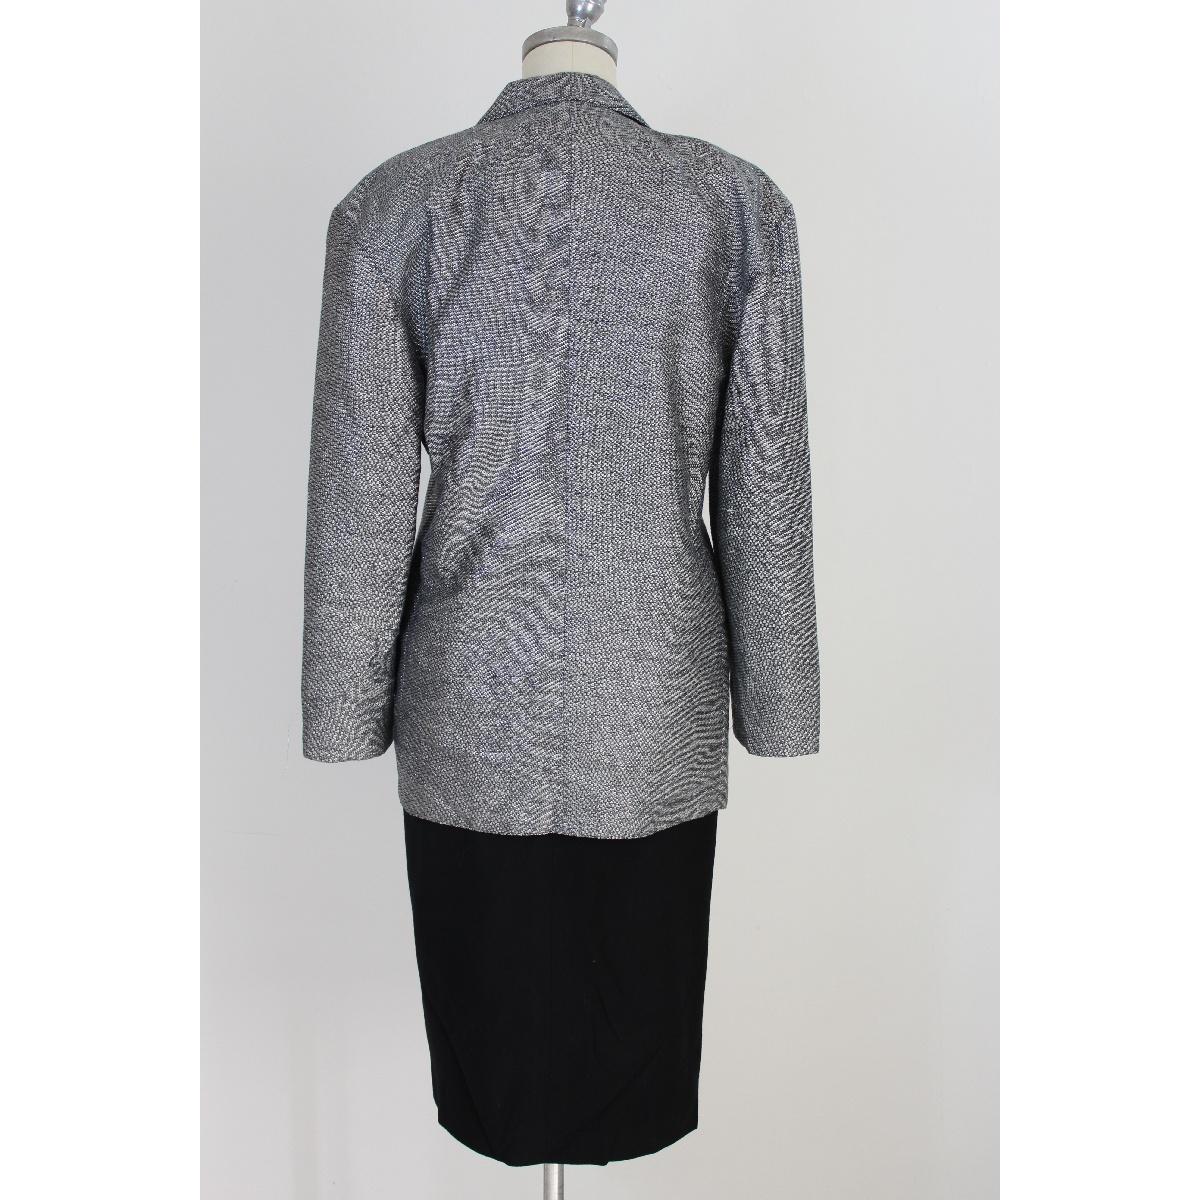 Escada vintage 1980s women's suit. Gray laminated linen and cotton jacket and black wool skirt. Size 36 made in Germany, new without label.

Size 42 It 8 Us 10 Uk

Shoulders: 48 cm
Chest / Bust: 50 cm
Sleeves: 58 cm
Length: 82 cm
Skirt waist: 34